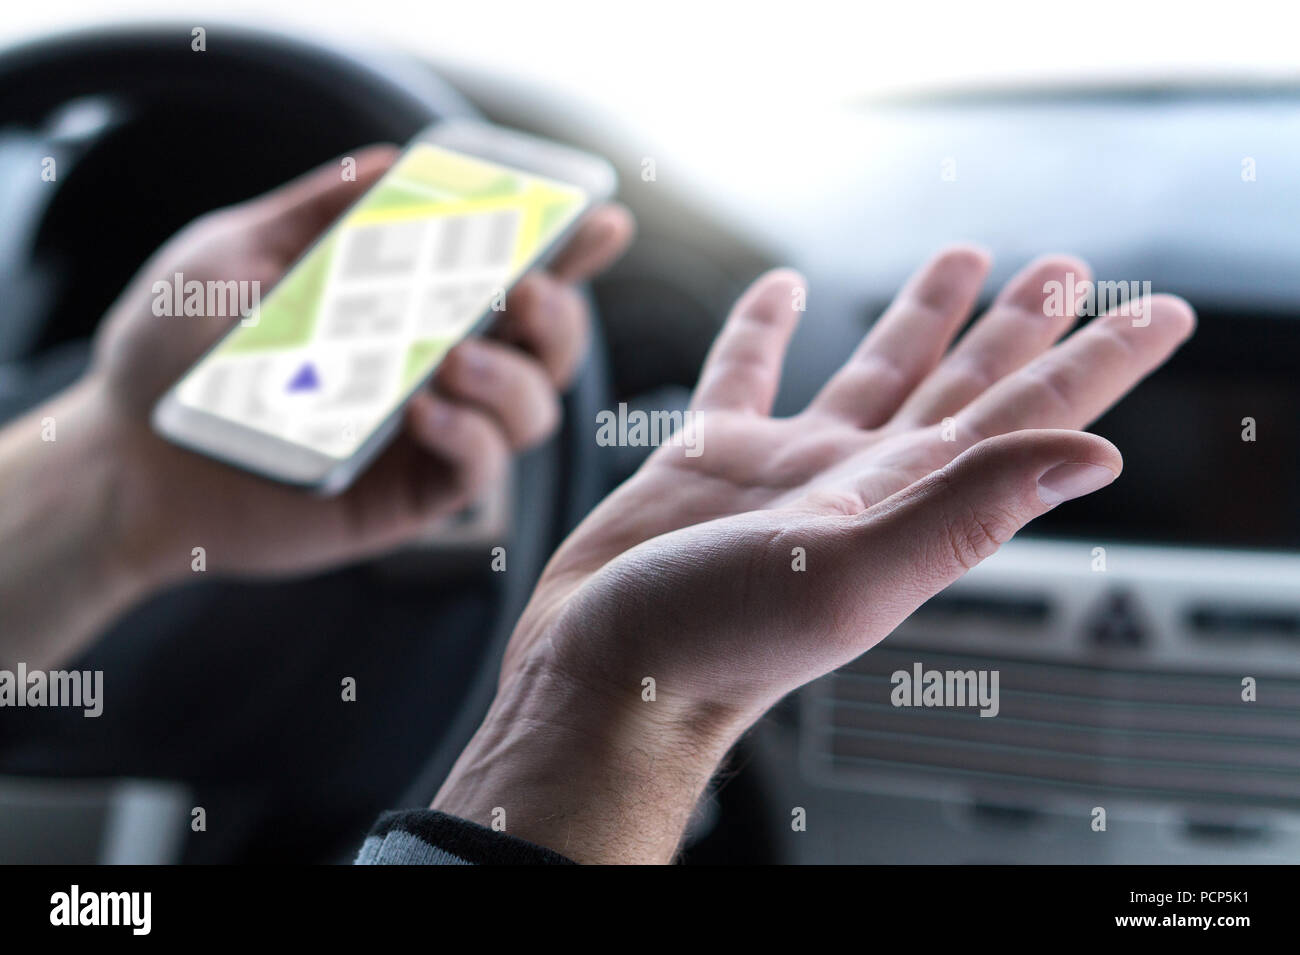 Lost and no GPS connection. Navigation problem. Man using smartphone map application in car. Clueless and confused driver spreading hands. Stock Photo